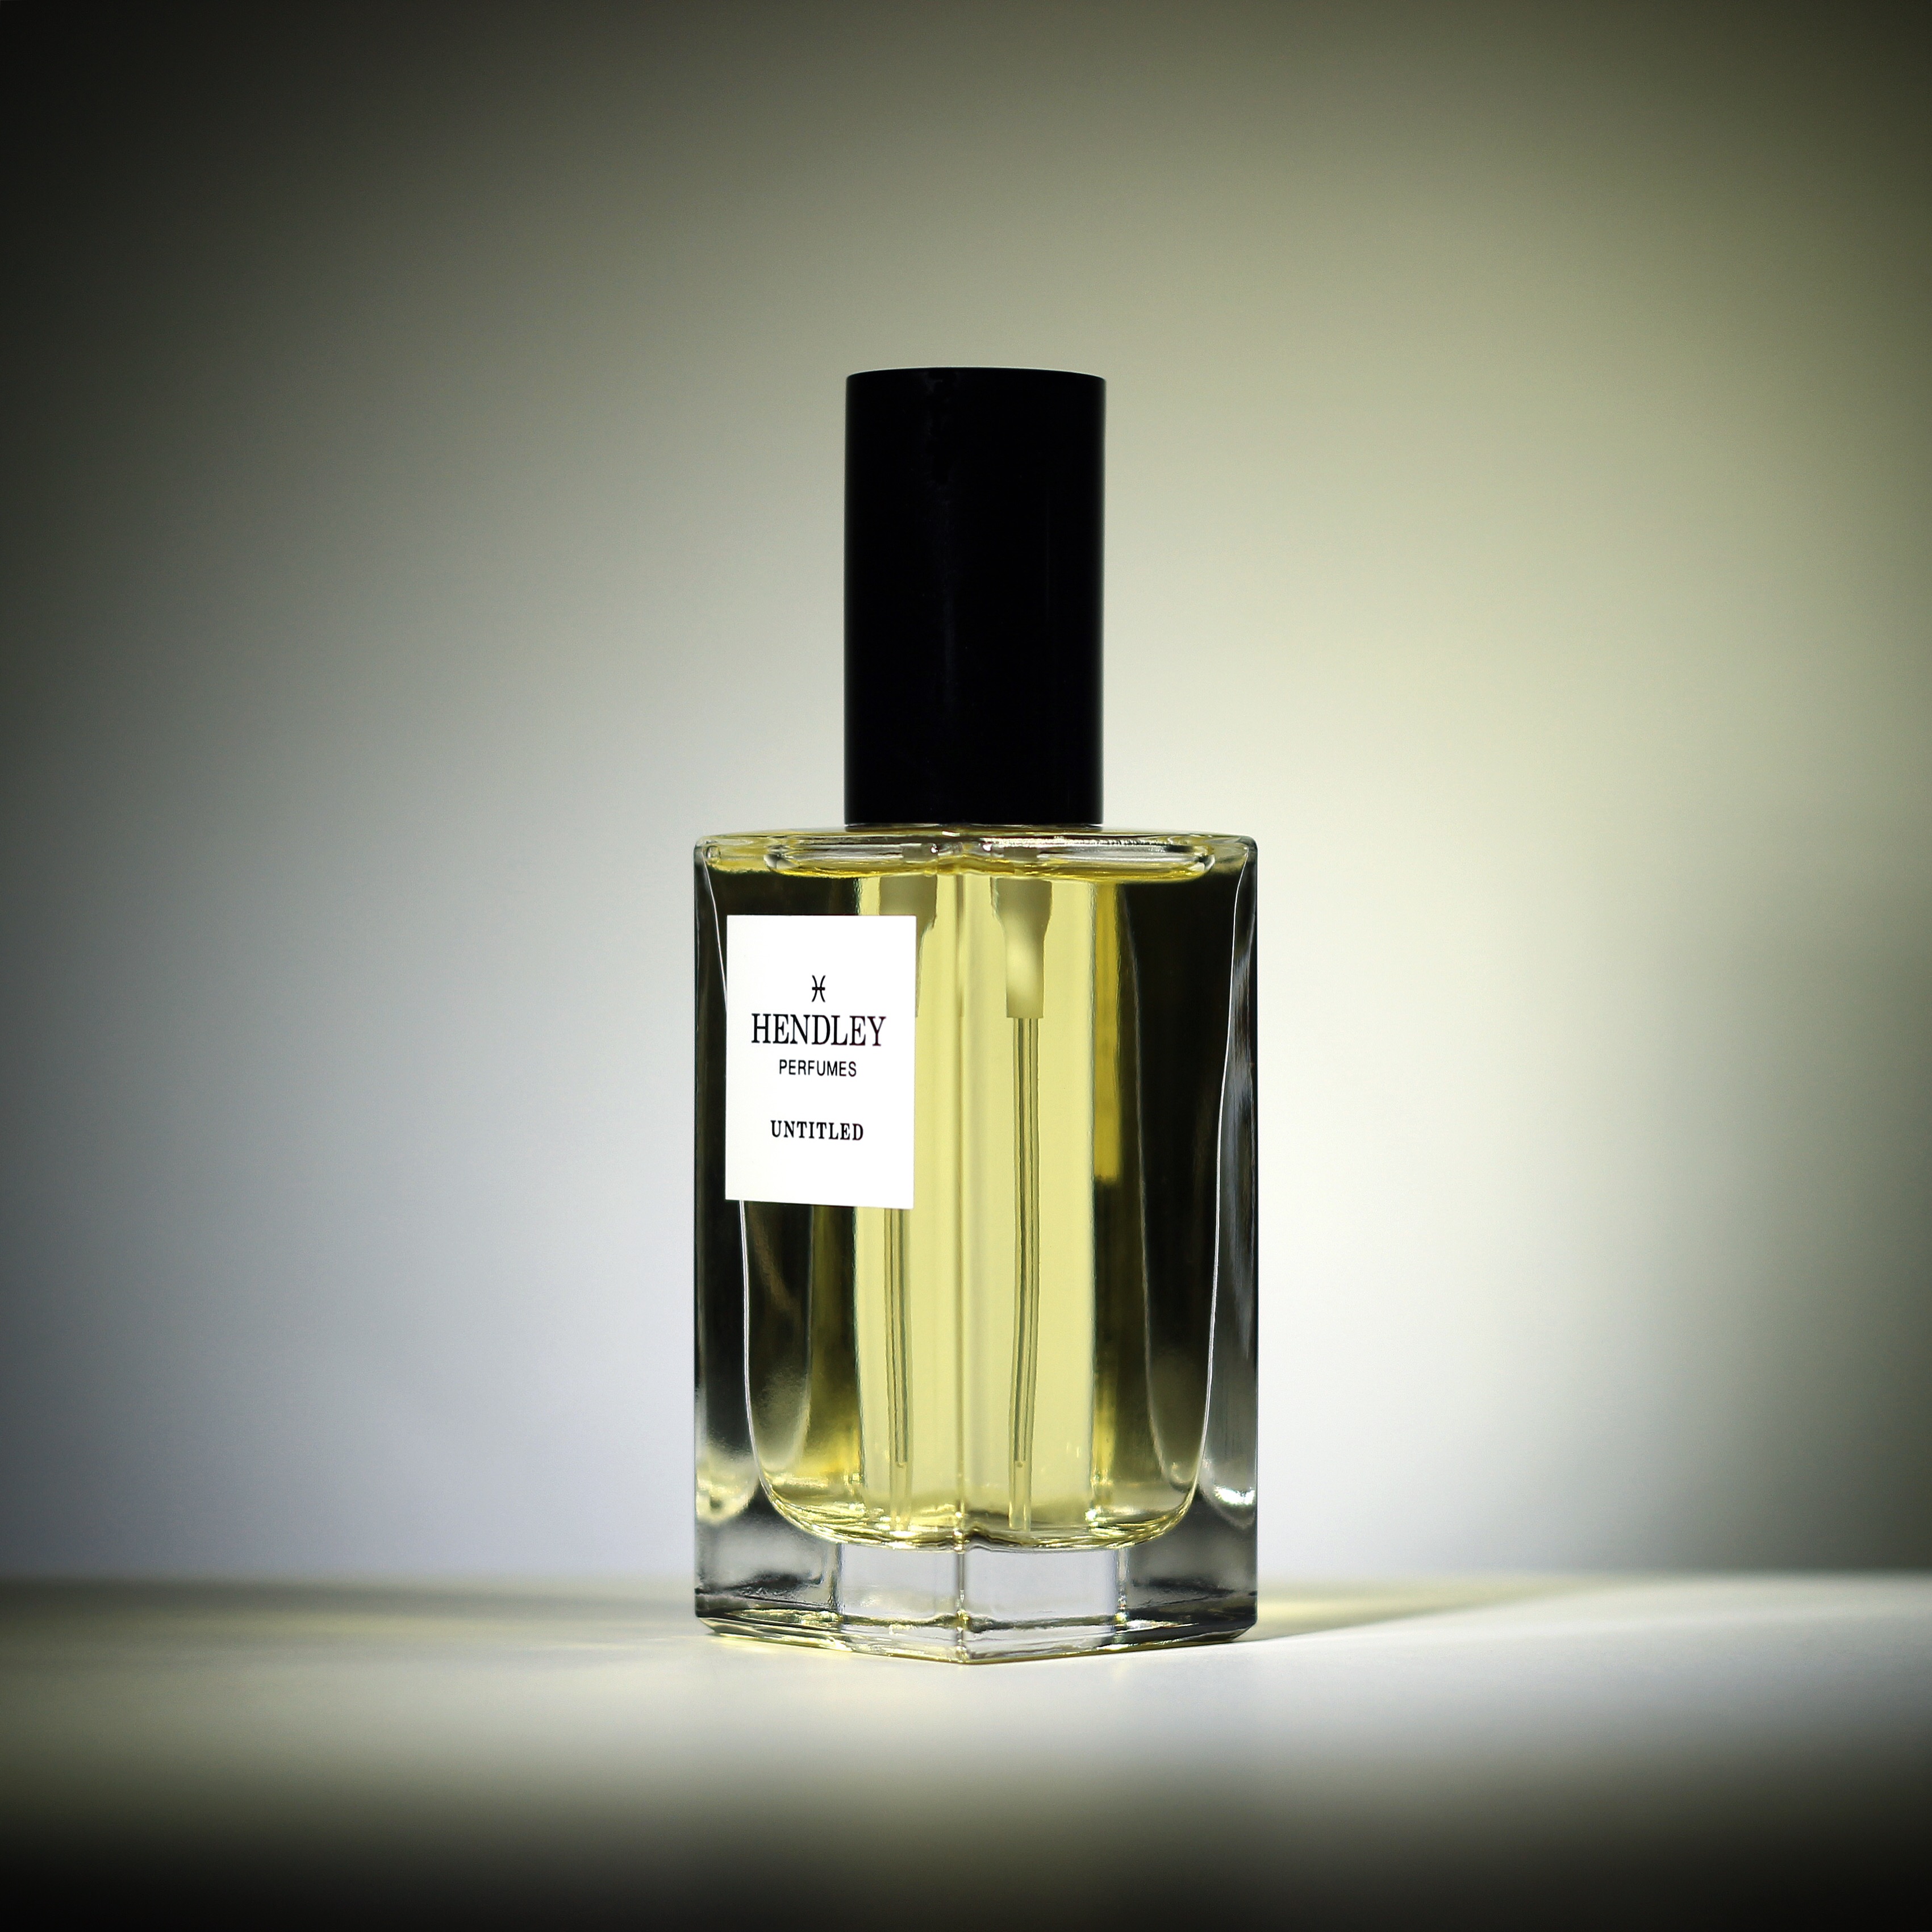 Untitled Hendley Perfumes perfume a fragrance for women and men 2019